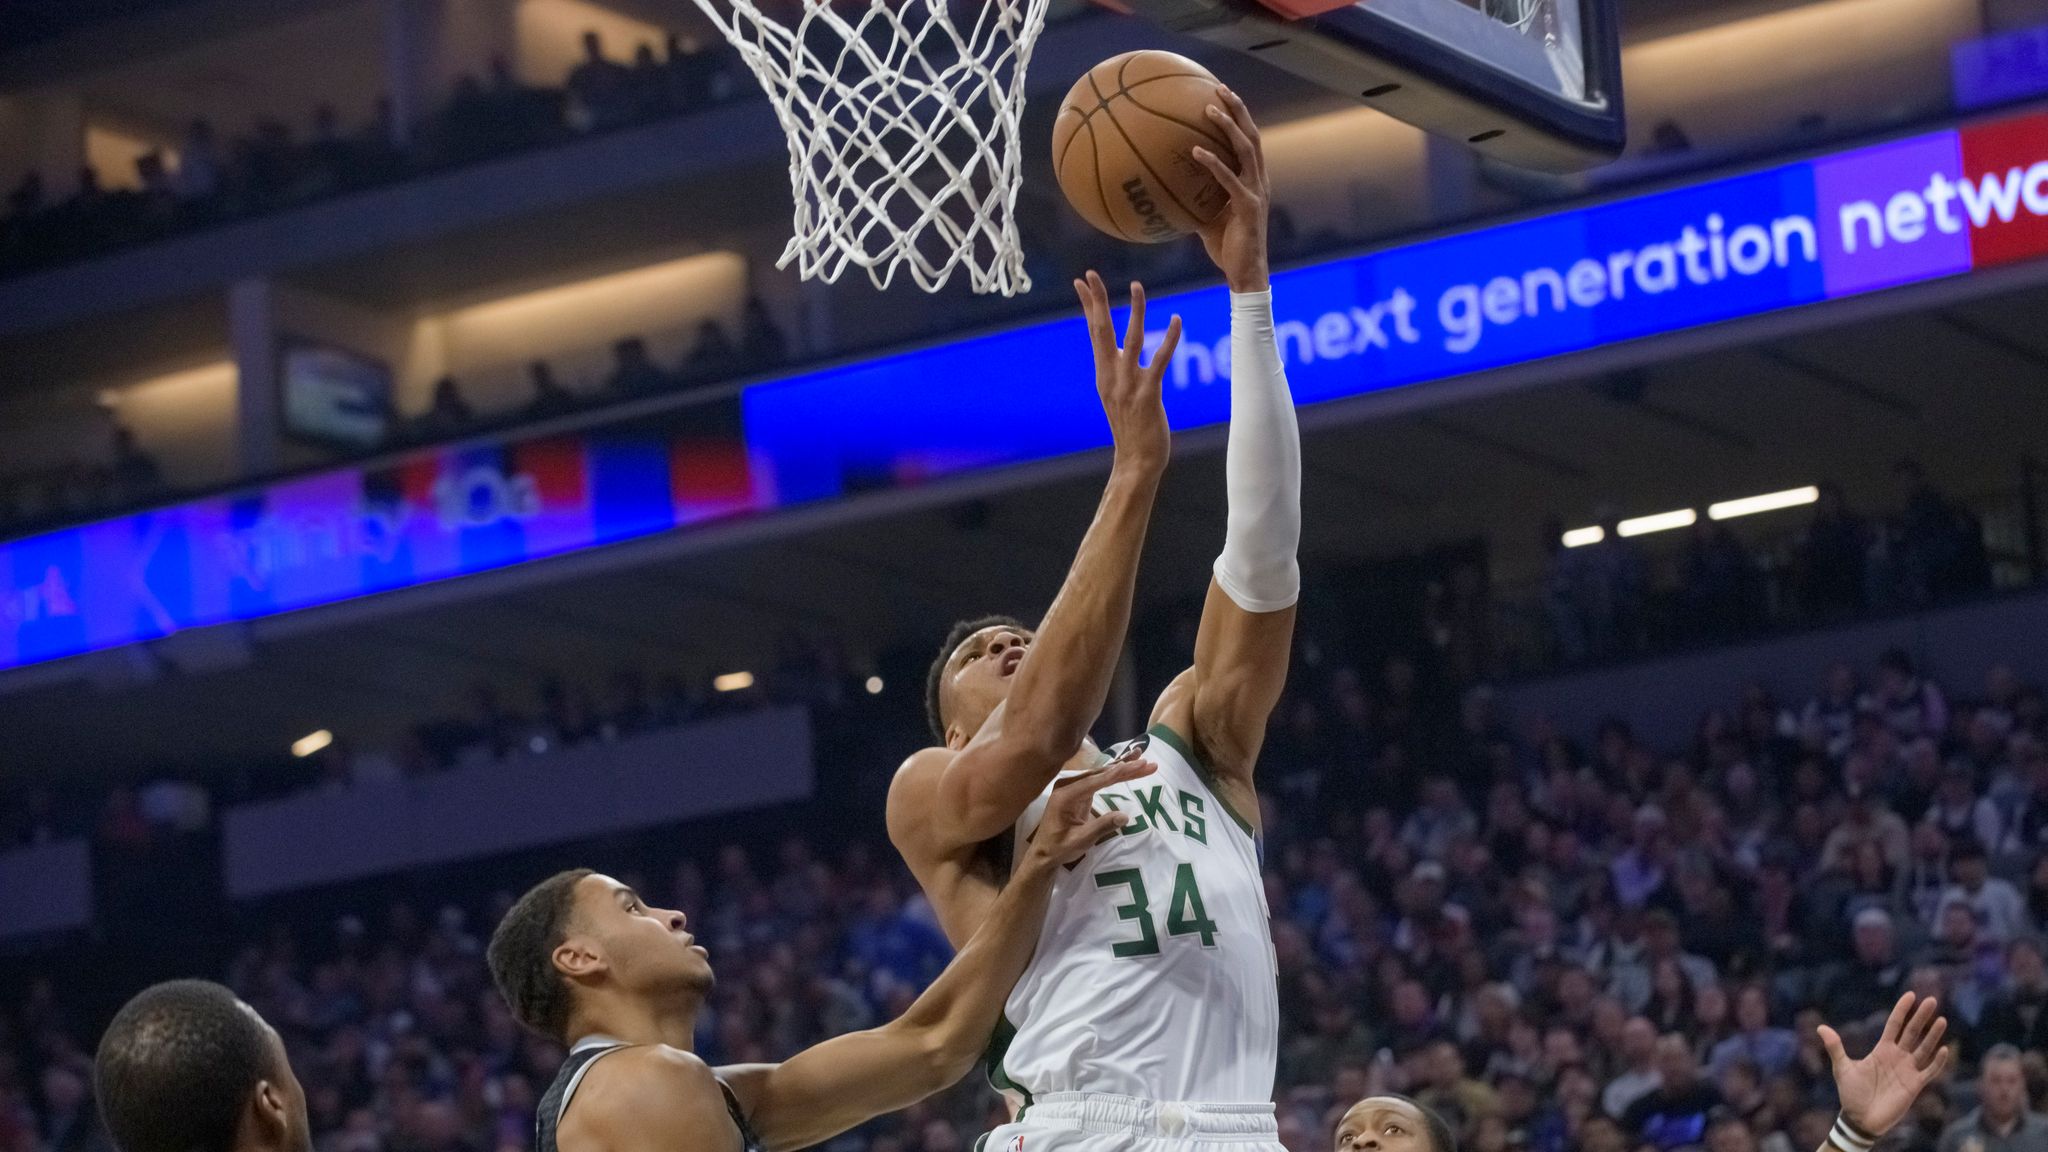 I'm buying my son a Giannis jersey as his first jersey